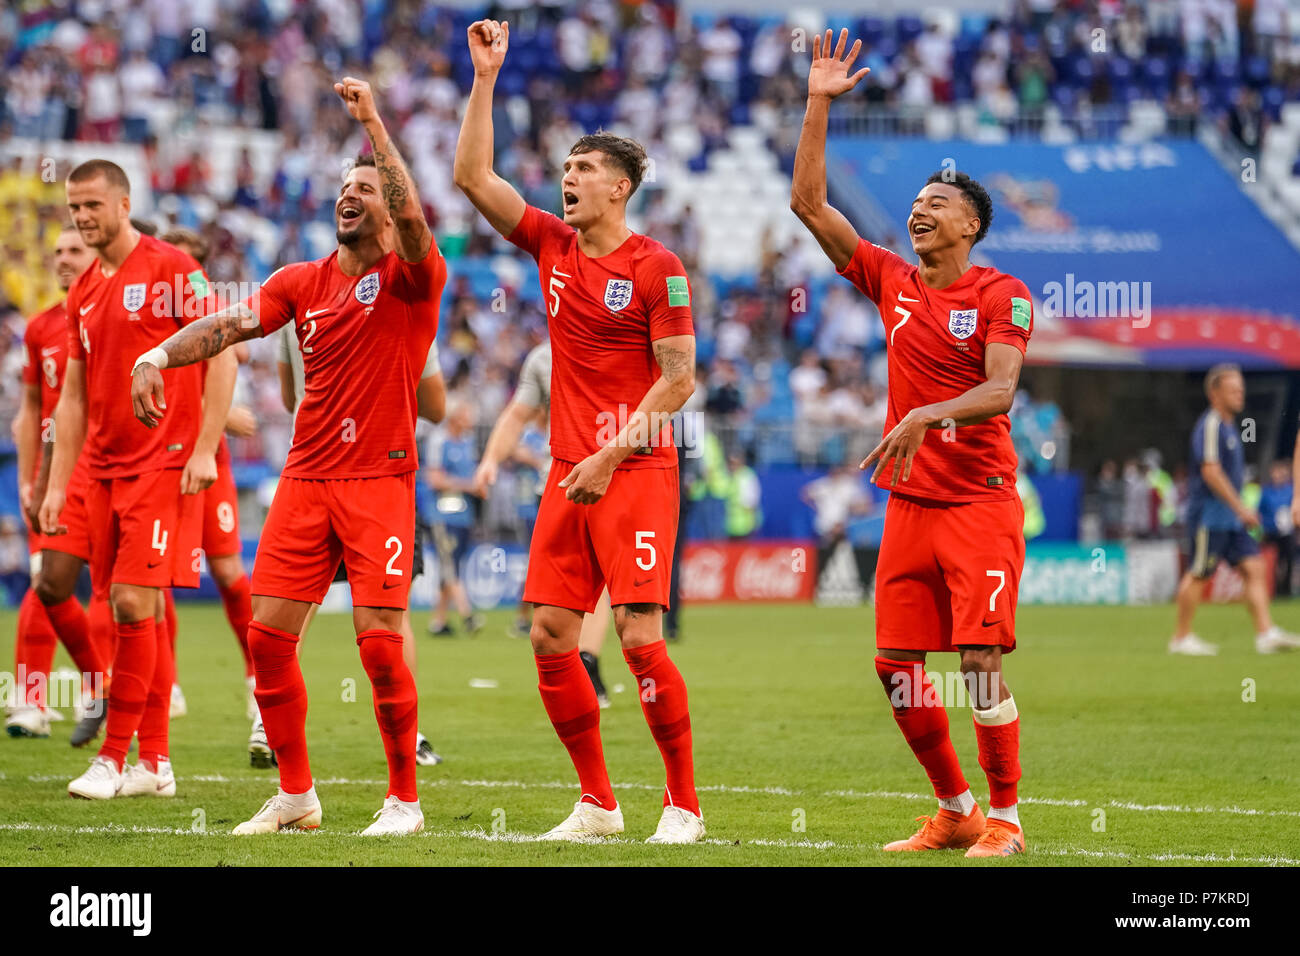 Samara, Russia. 7th July 2018.  Jesse Lingard of England, John Stones of England and Kyle Walker of England celebrating the victory at Samara Stadium during the quarter final between England and Sweden during the 2018 World Cup. Ulrik Pedersen/CSM Credit: Cal Sport Media/Alamy Live News Stock Photo